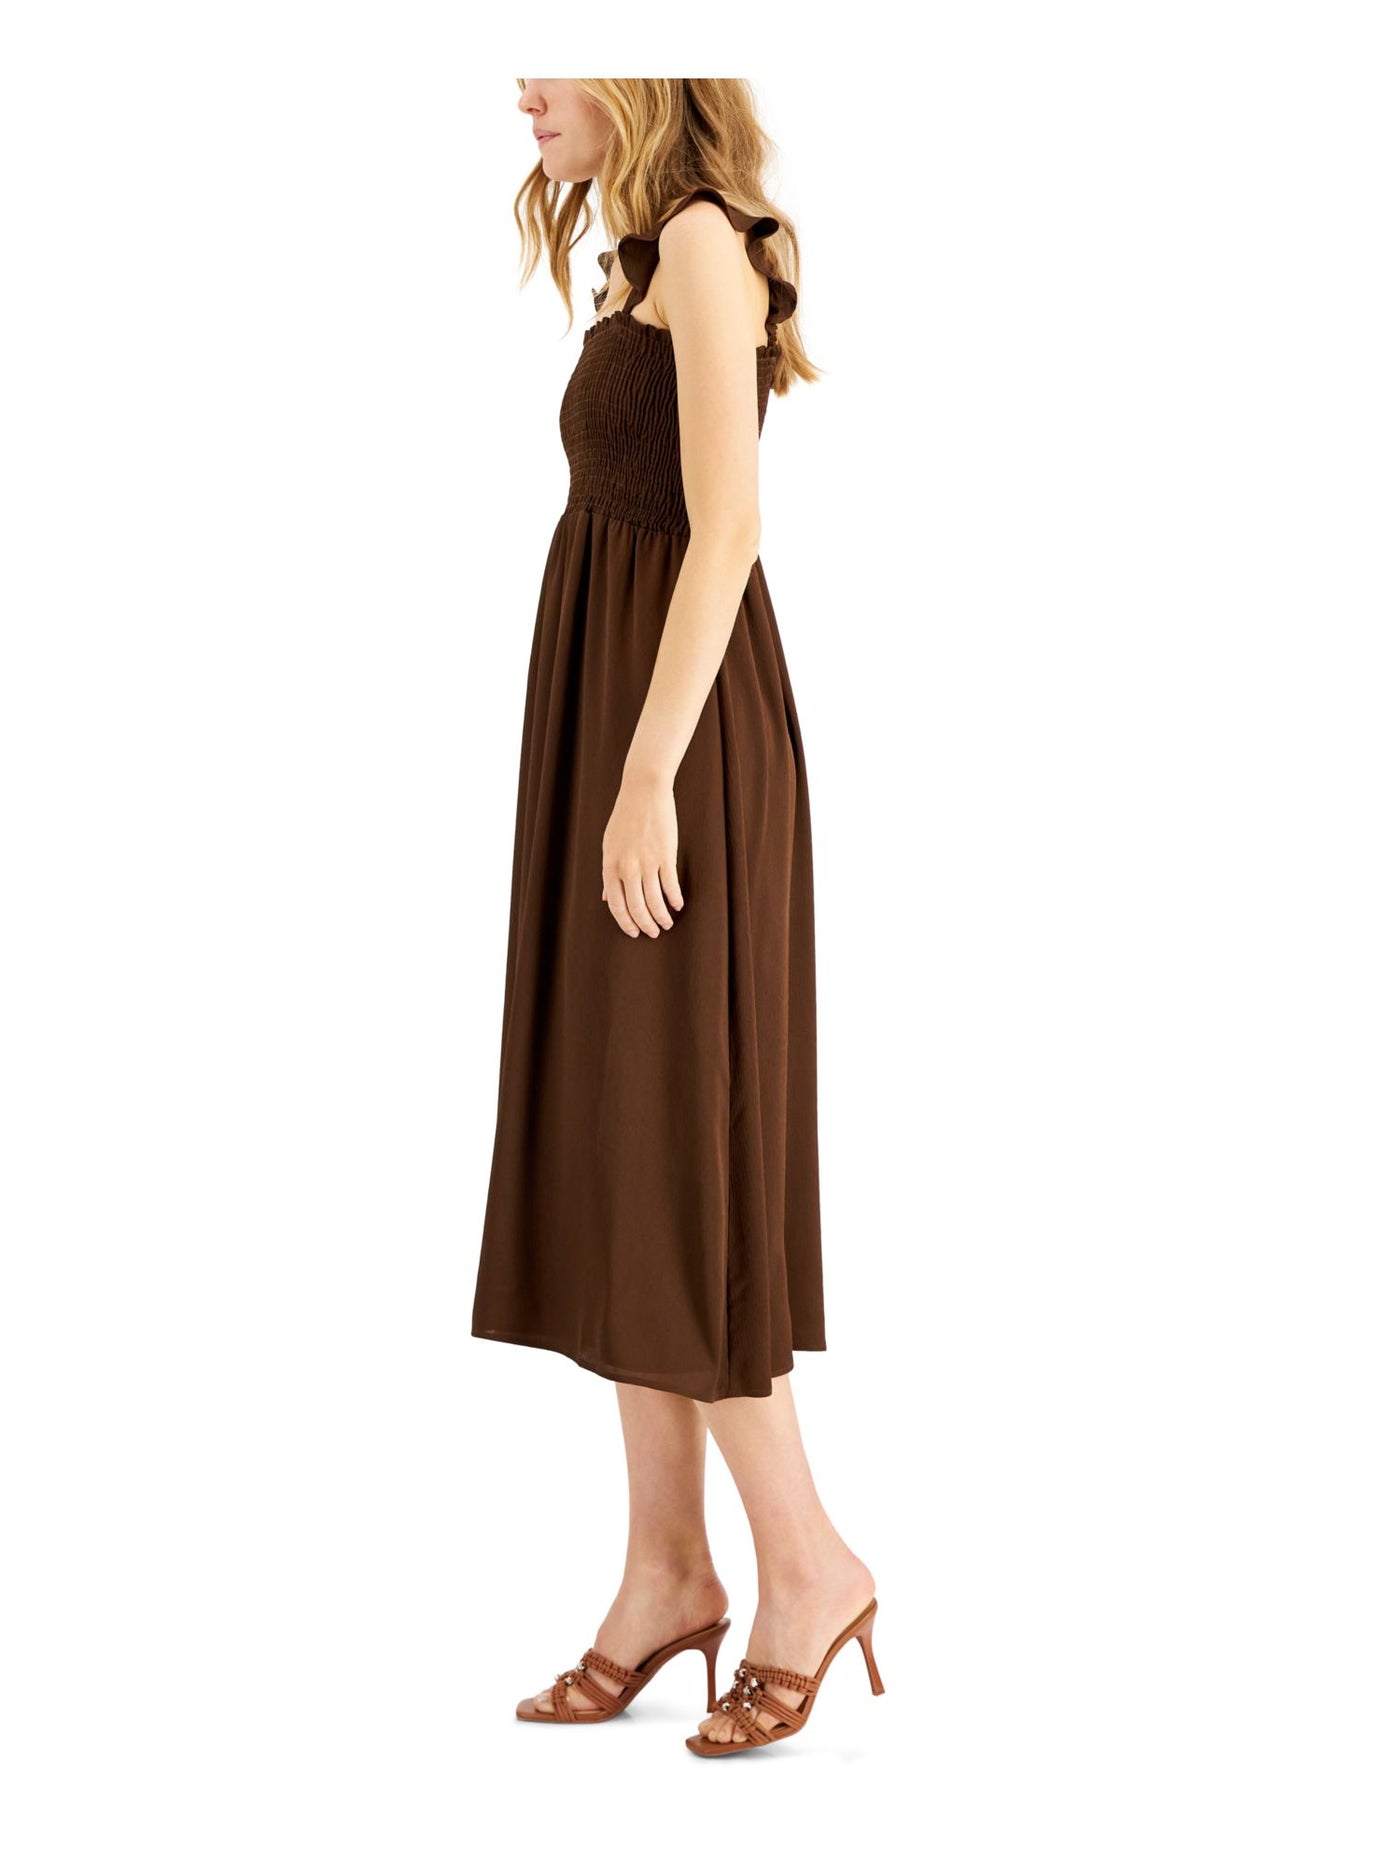 INC DRESSES Womens Brown Smocked Ruffled Pullover Sleeveless Square Neck Midi Fit + Flare Dress 6